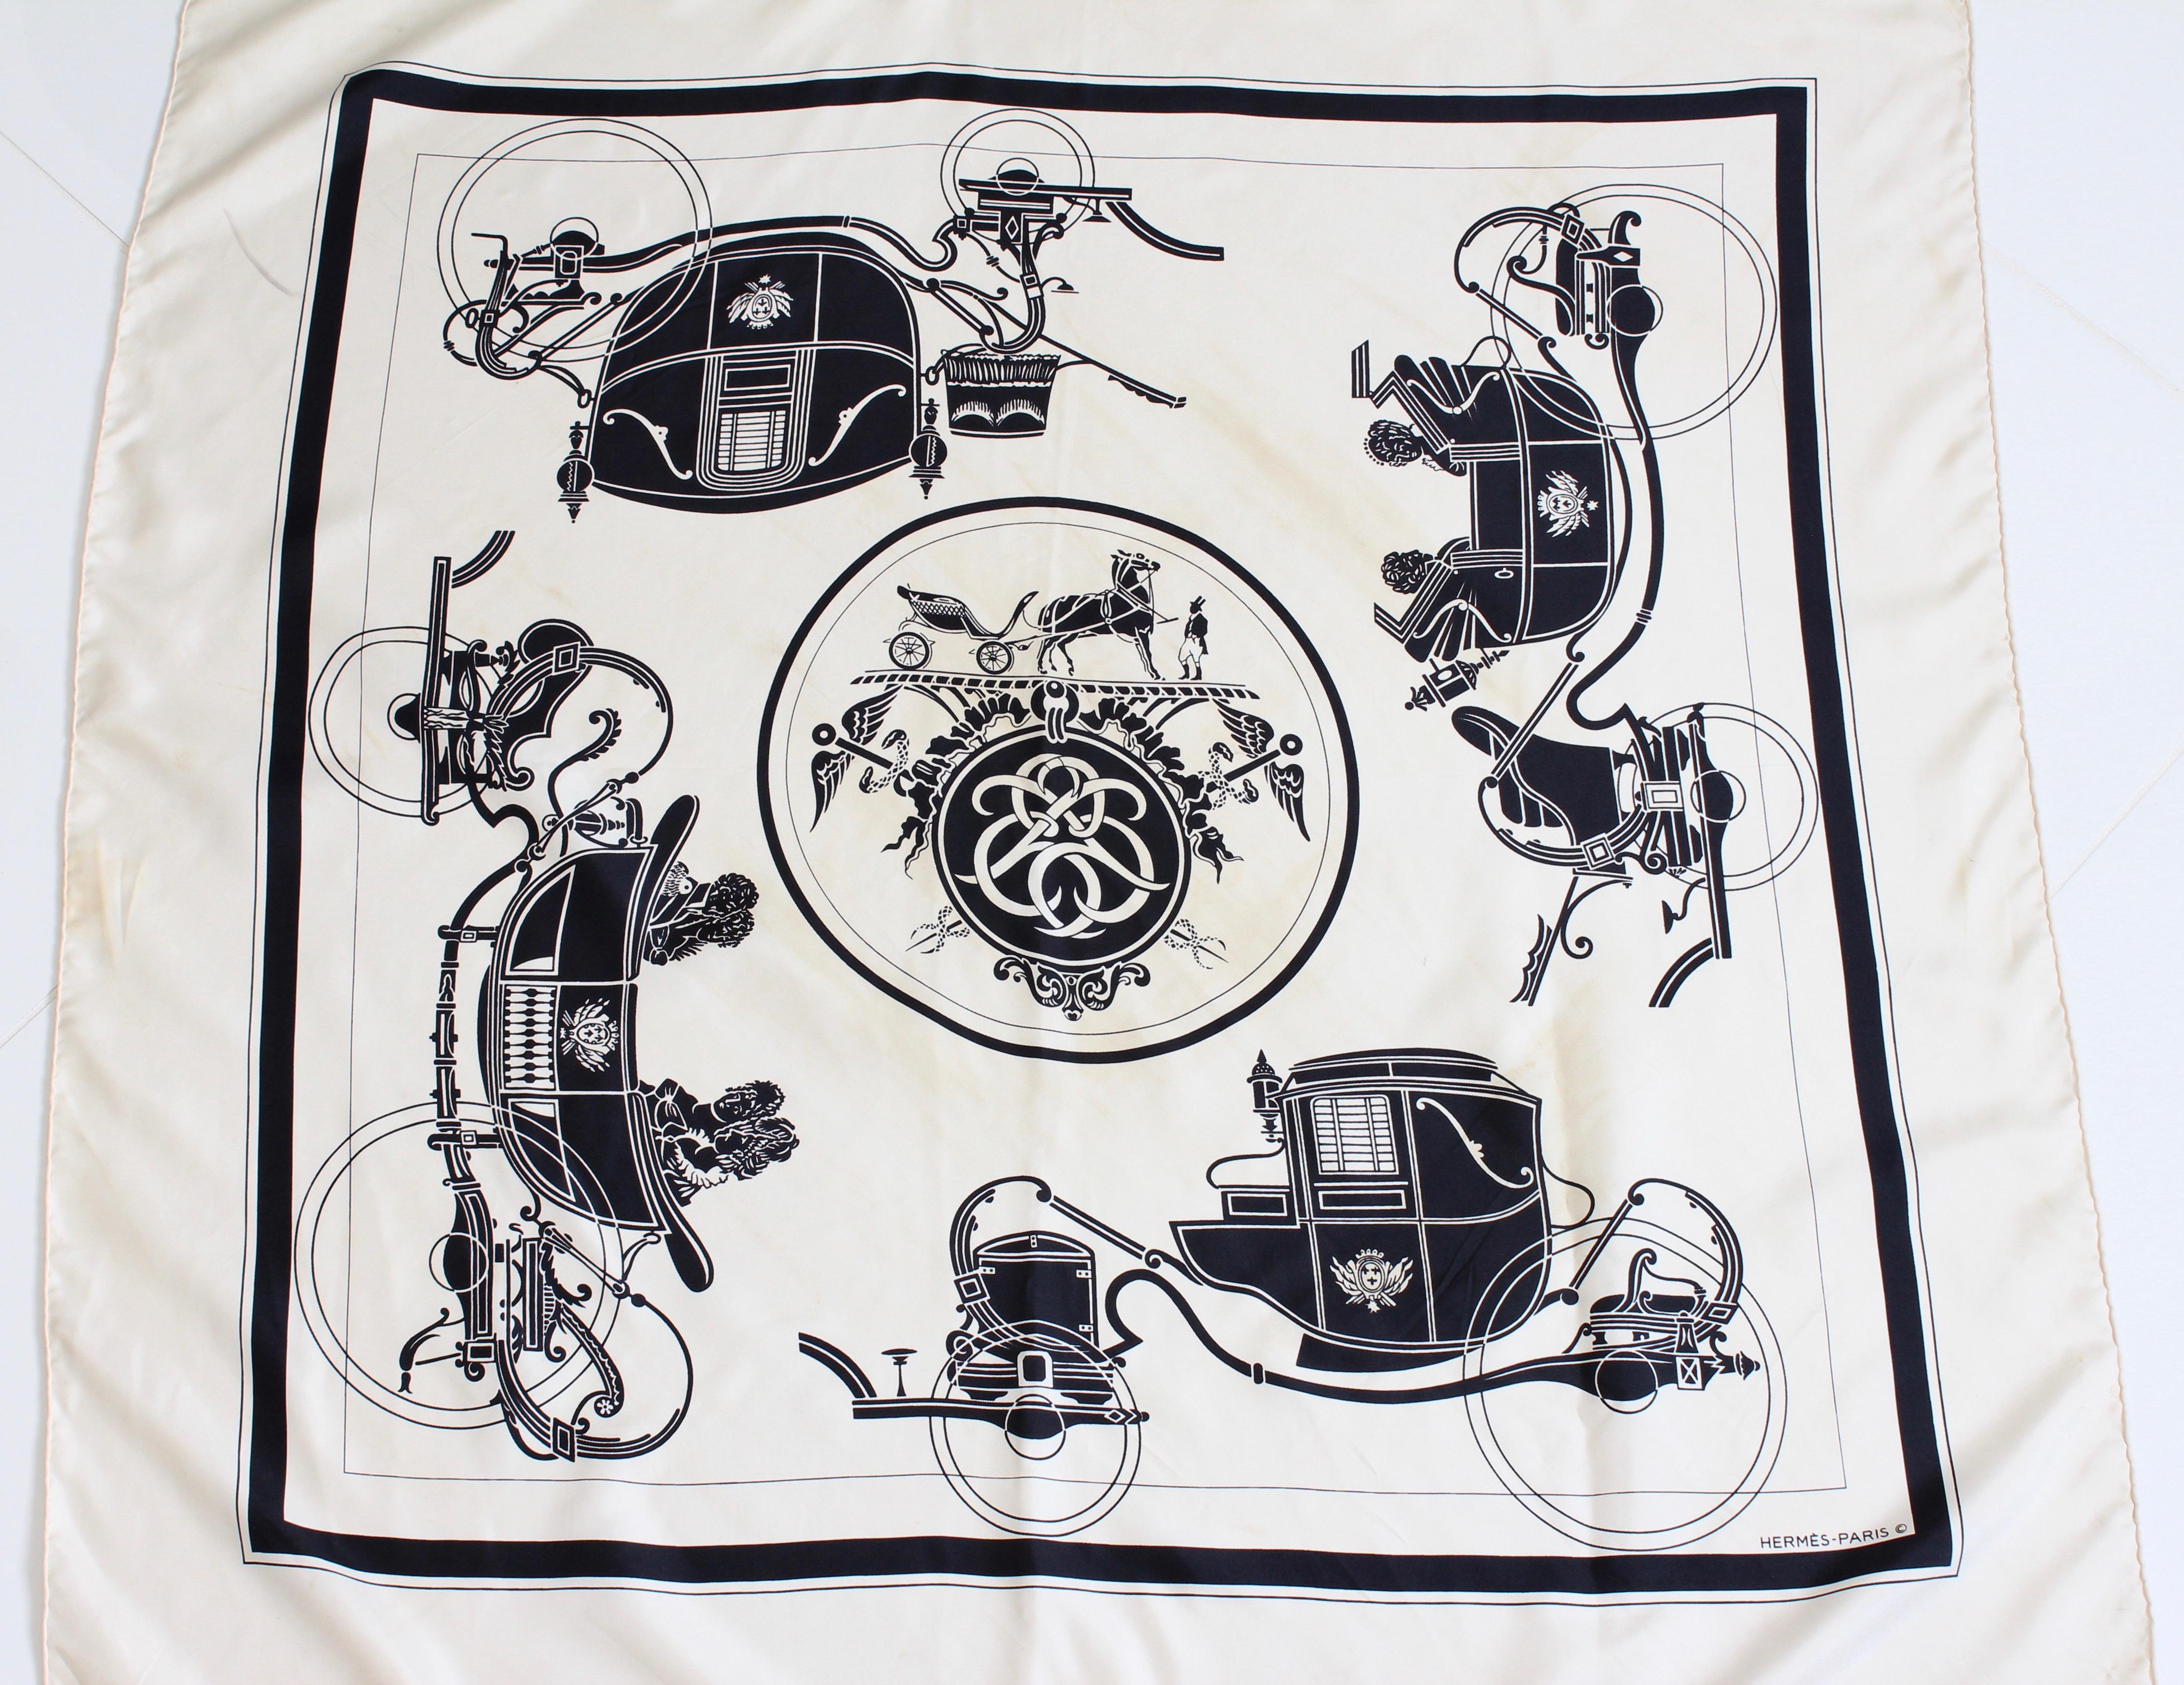 This cream and black silk twill scarf was designed by Hugo Grygkar, the artist responsible for the first carre or scarf design for Hermes.  This iconic design was created in 1946 and is the inspiration for what we now know as the house's logo.  This